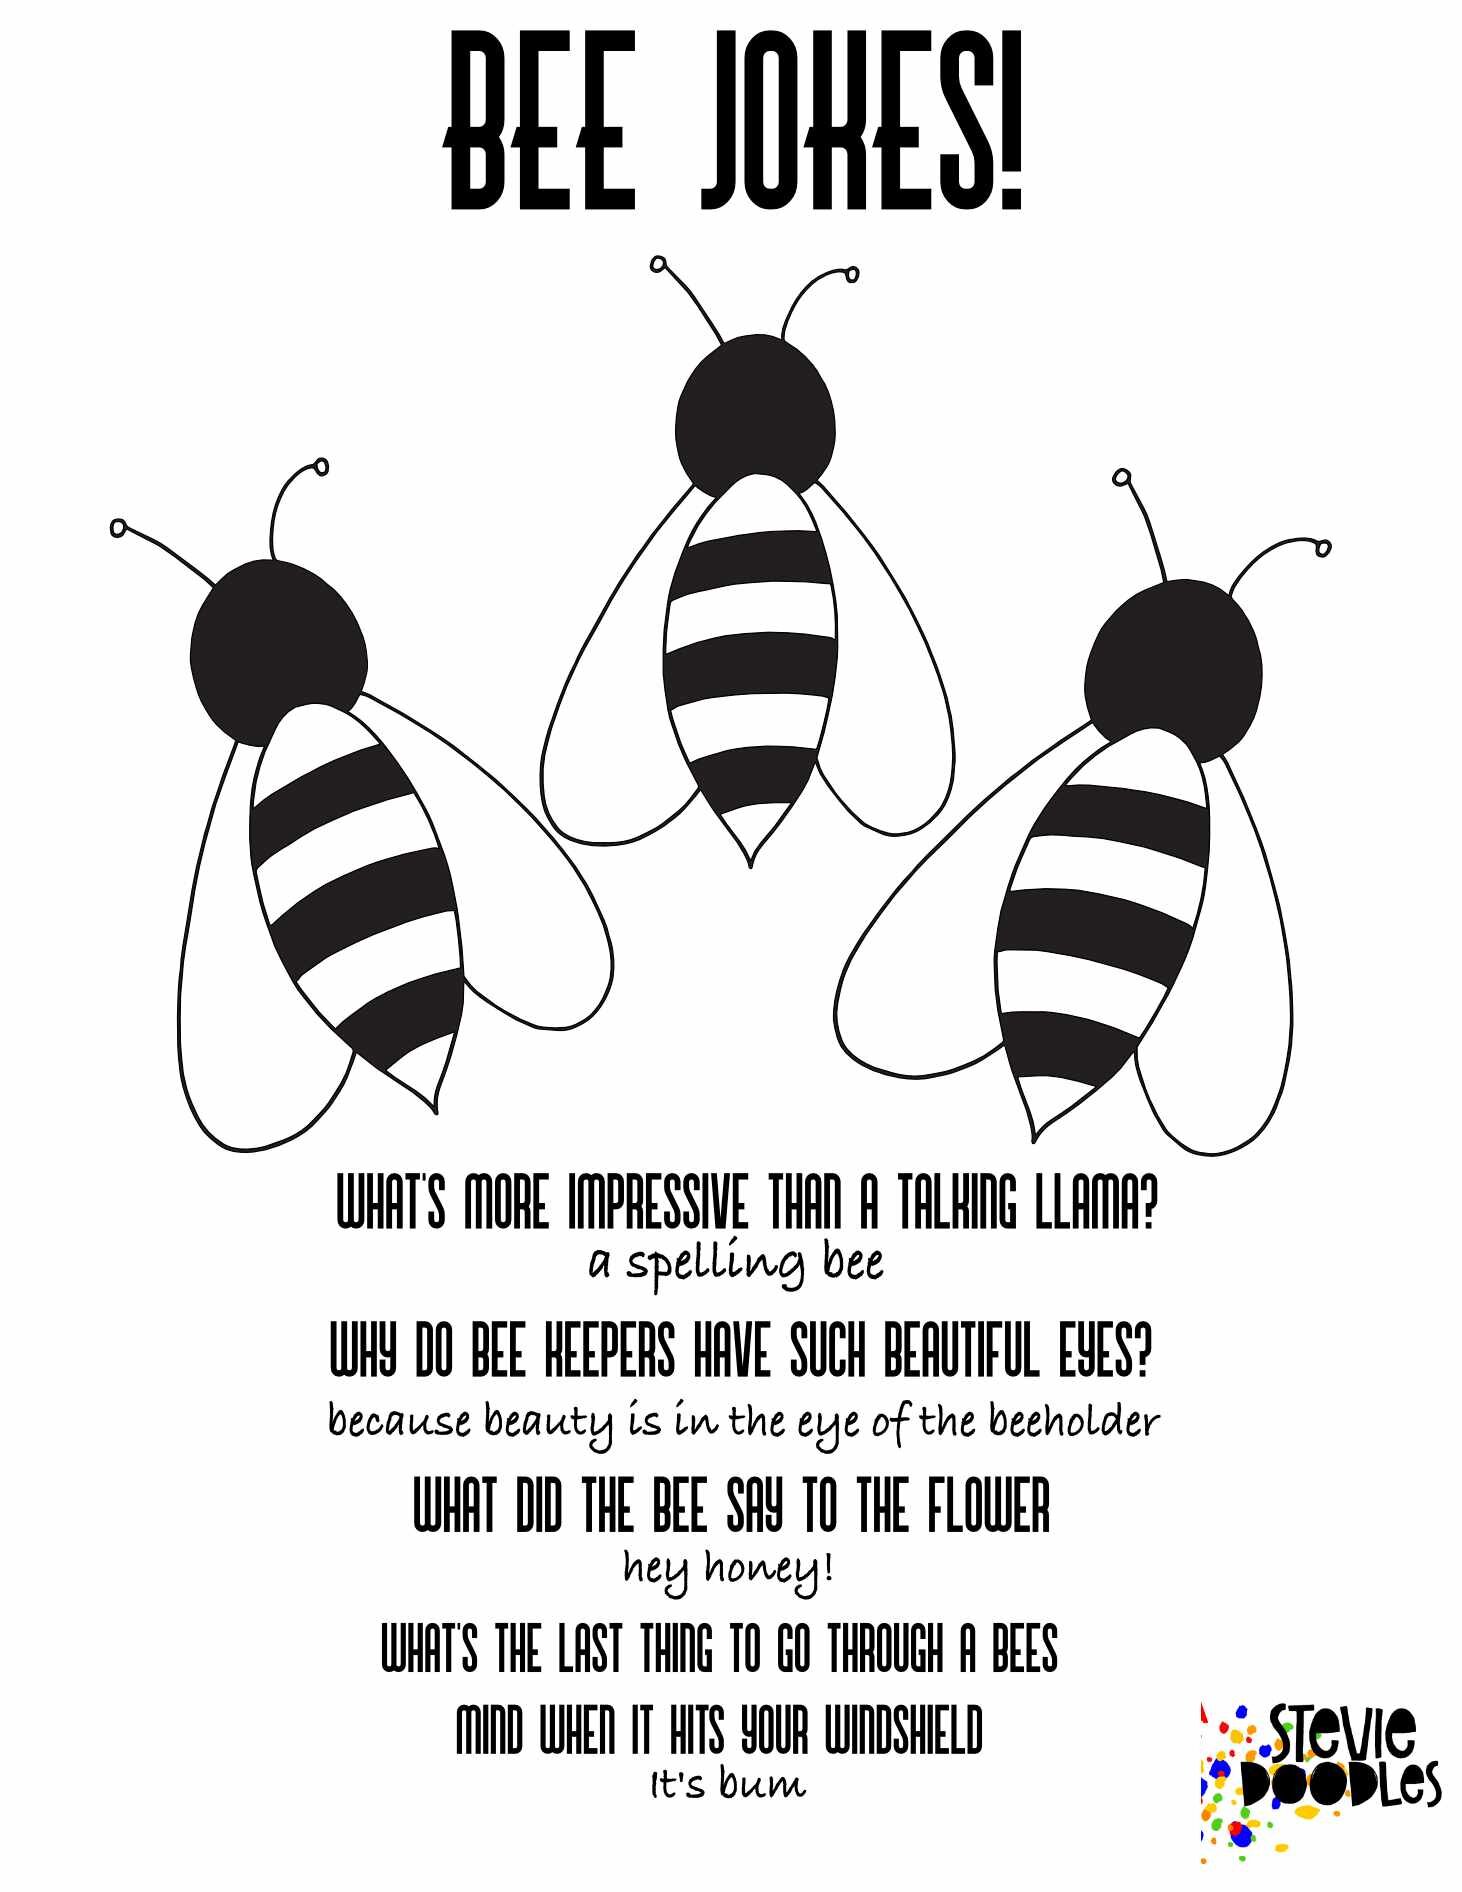 Bee Jokes - Free Printable Coloring Page Over 1000 free coloring pages at Stevie Doodles